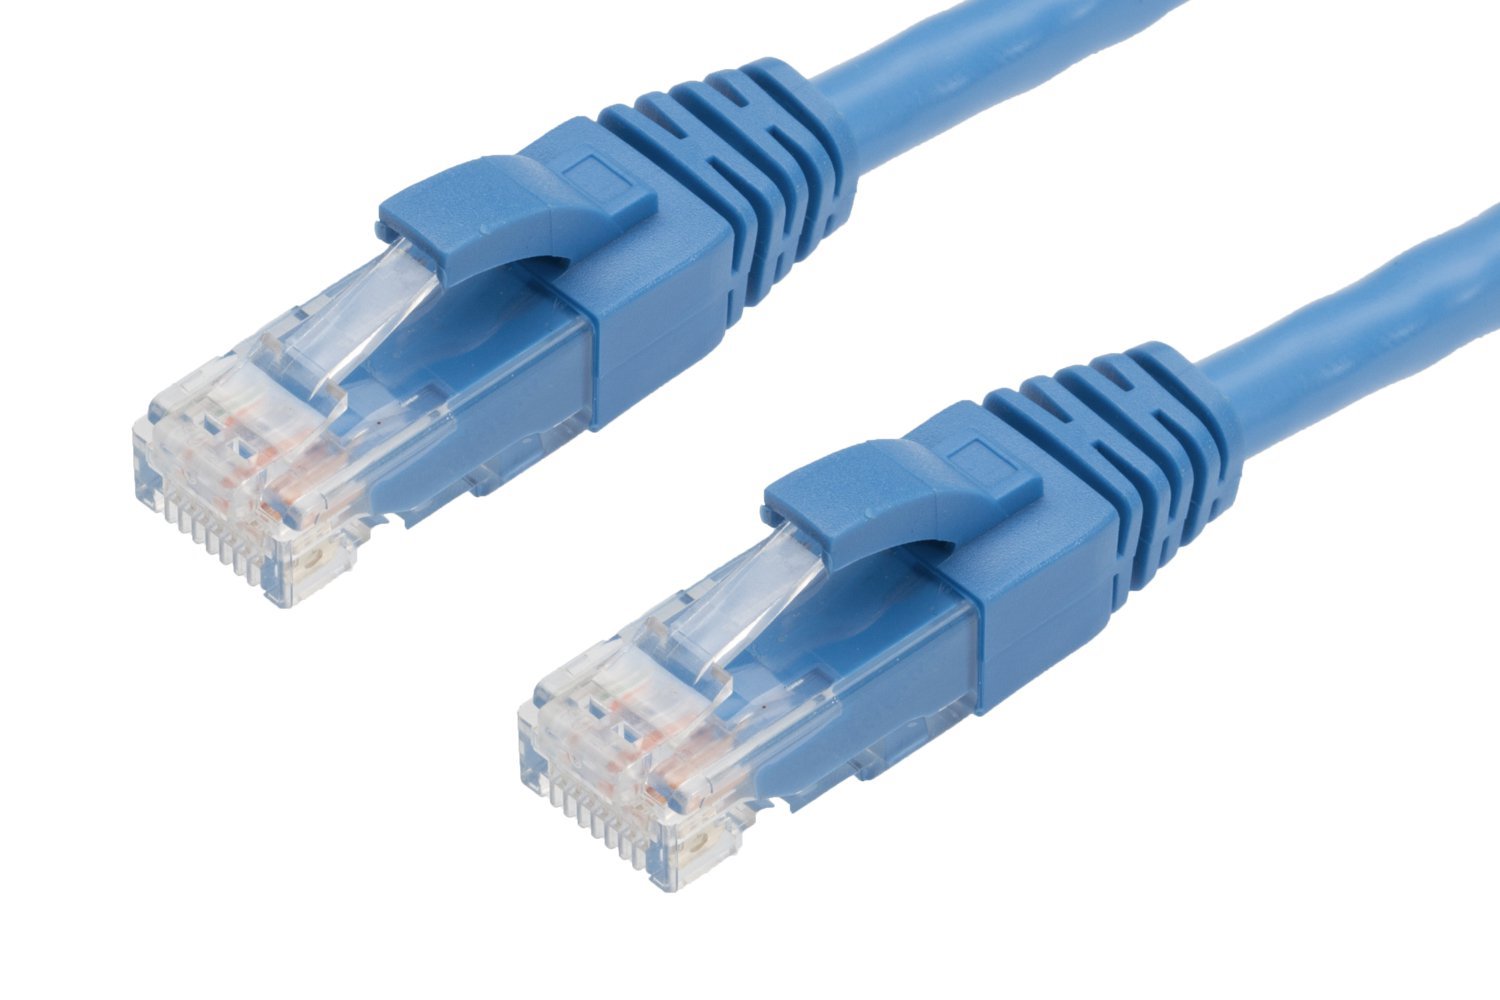 4Cabling 10M Cat 6 Ethernet Network Cable: Blue